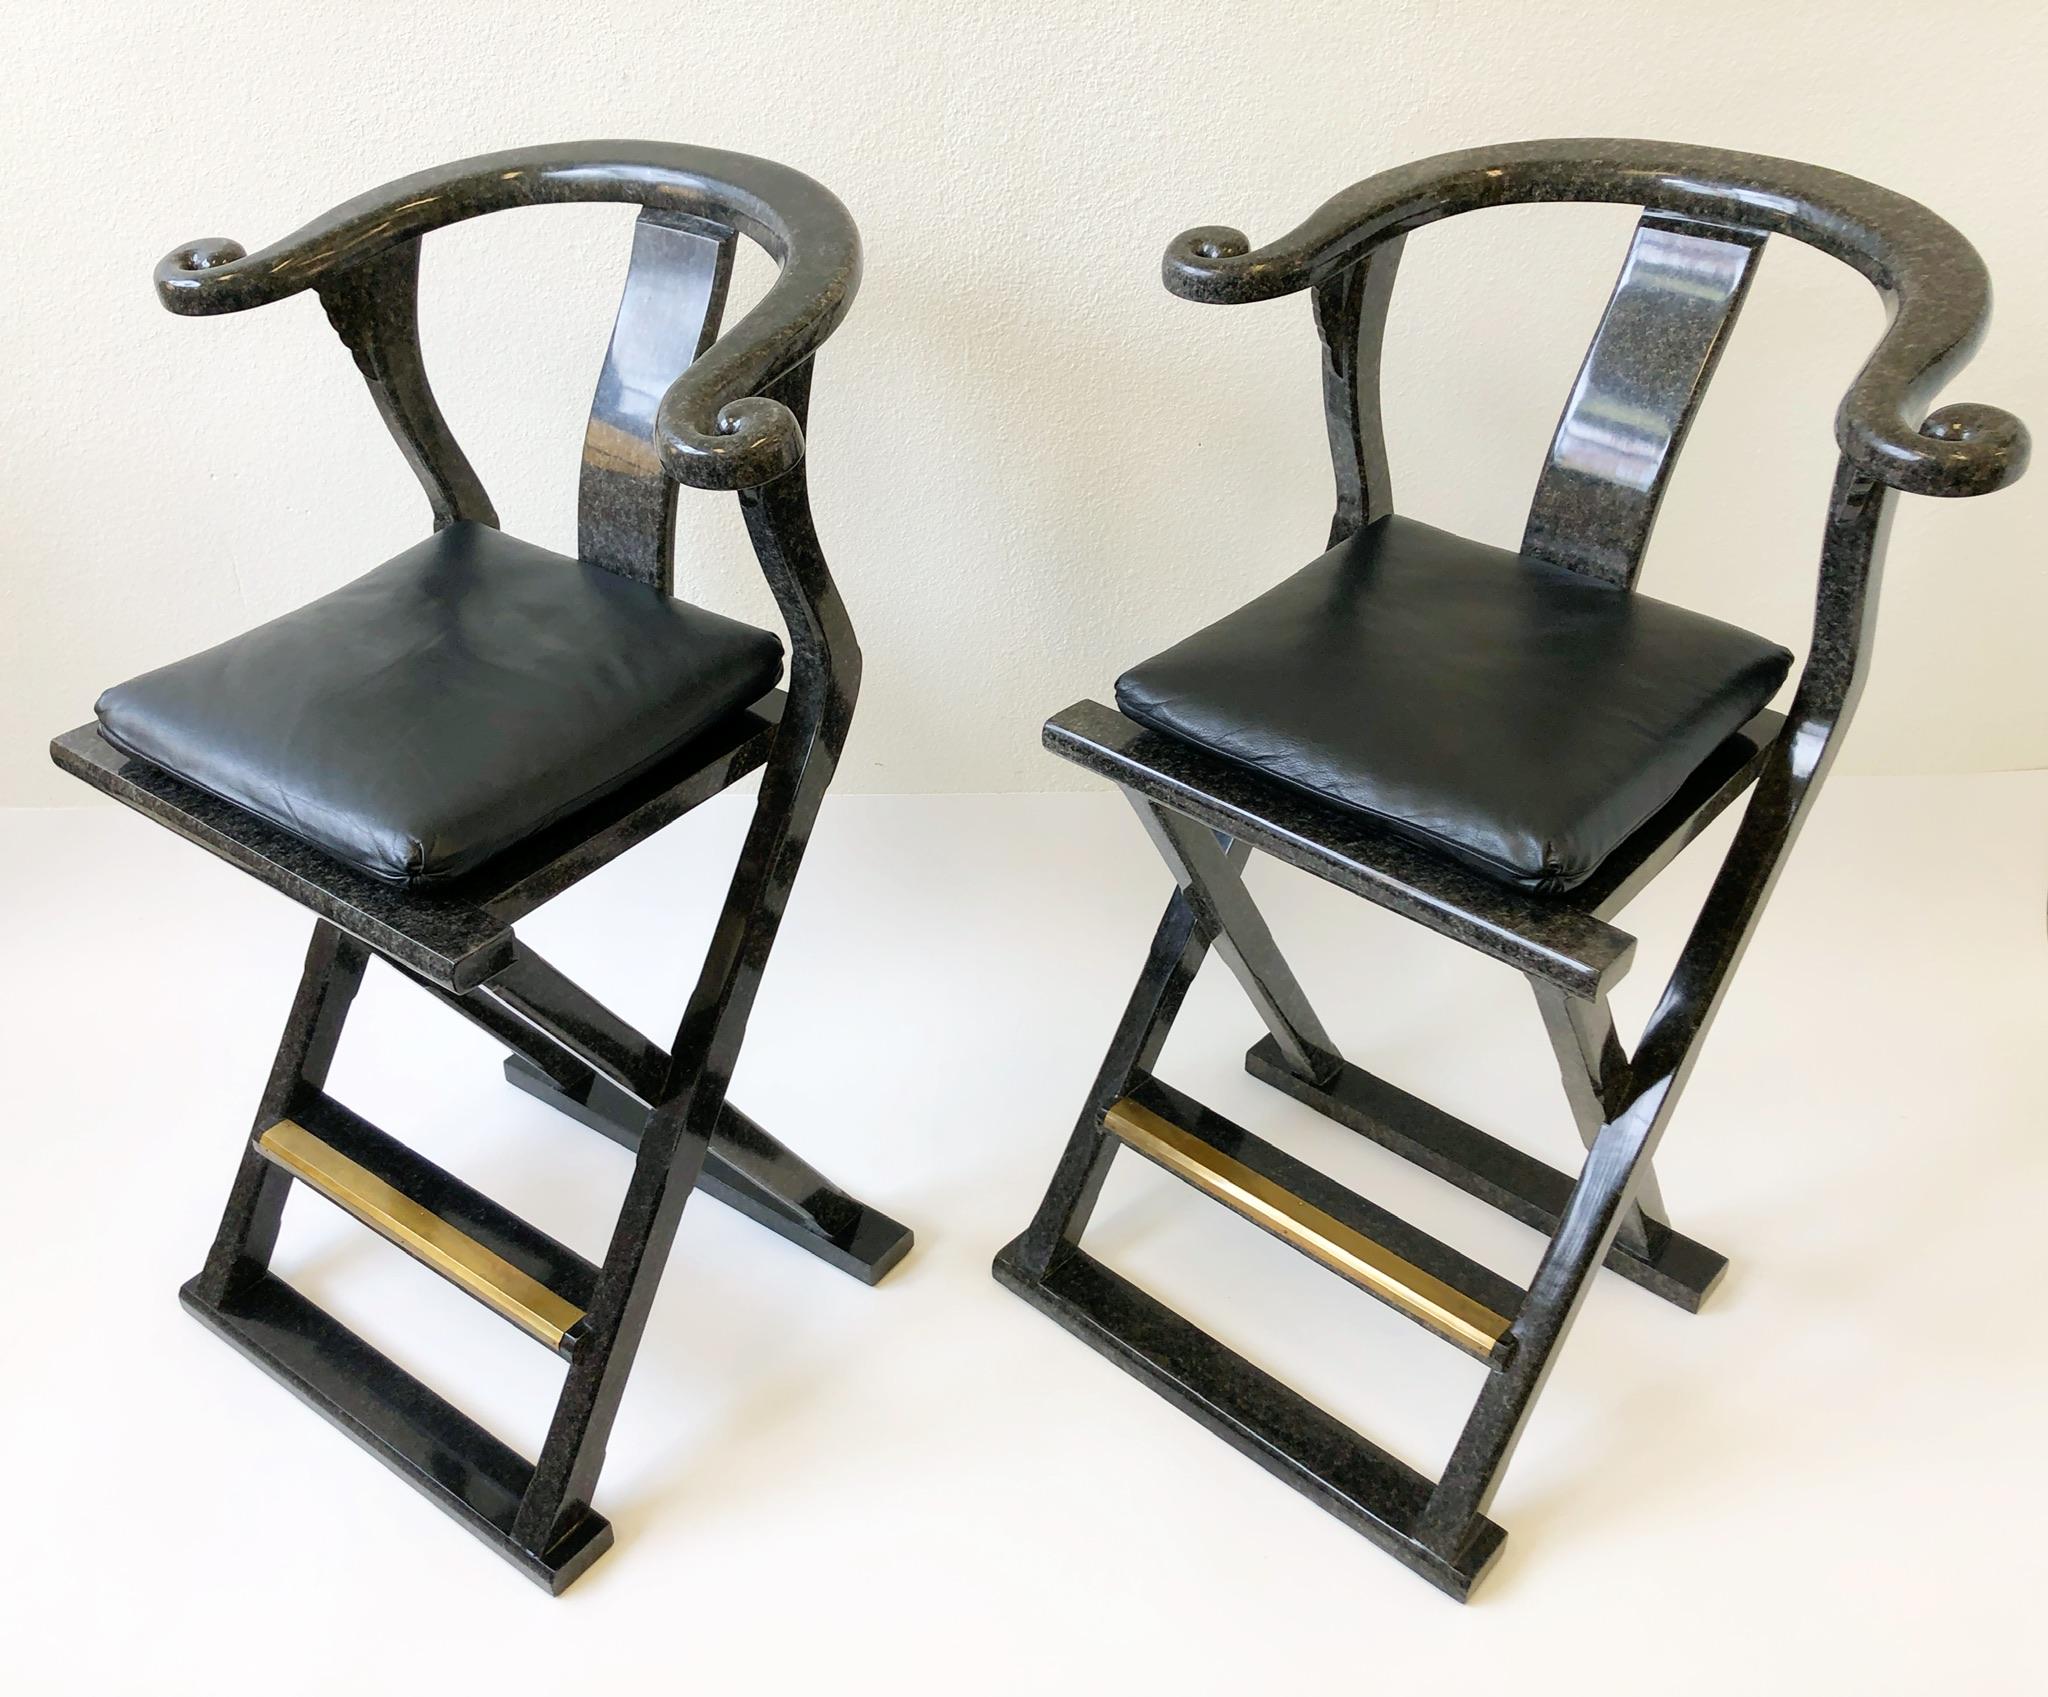 A glamorous pair of faux granite lacquered Asian Style barstools design by Marge Carson in the 1980s. The stools are constructed of wood that’s painted in black and gray faux granite lacquered finish. The seat is black leather and the footrest is